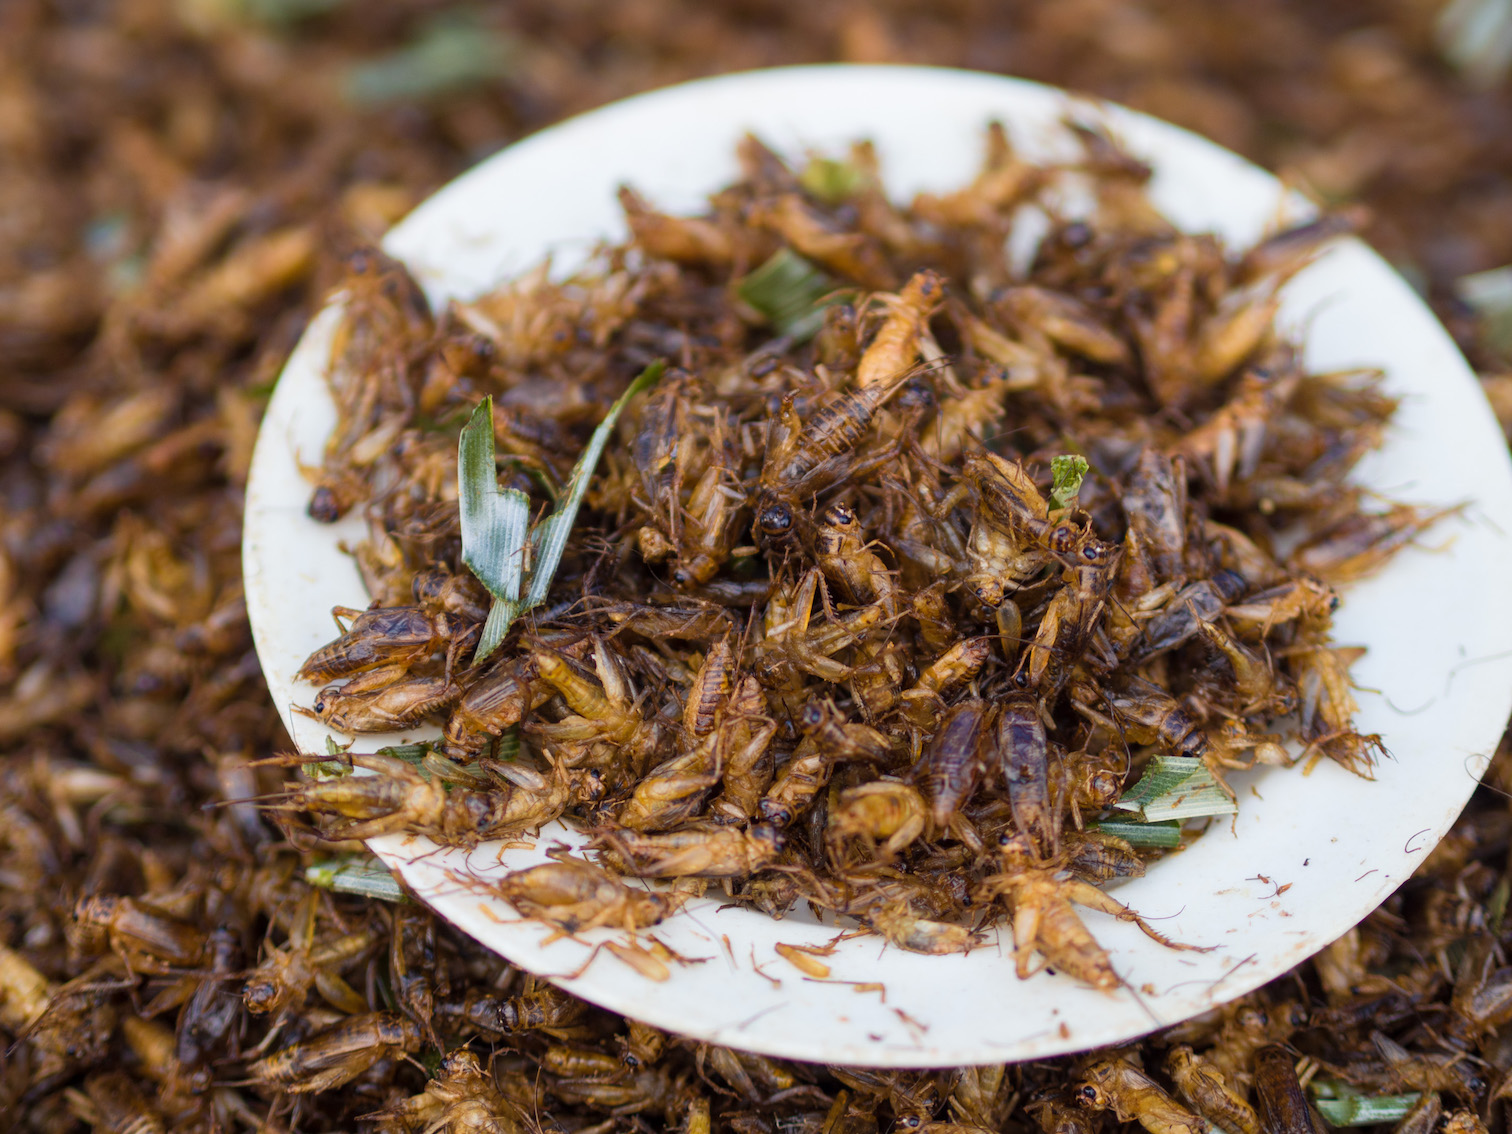 British government funding experiments that involve feeding African children INSECTS